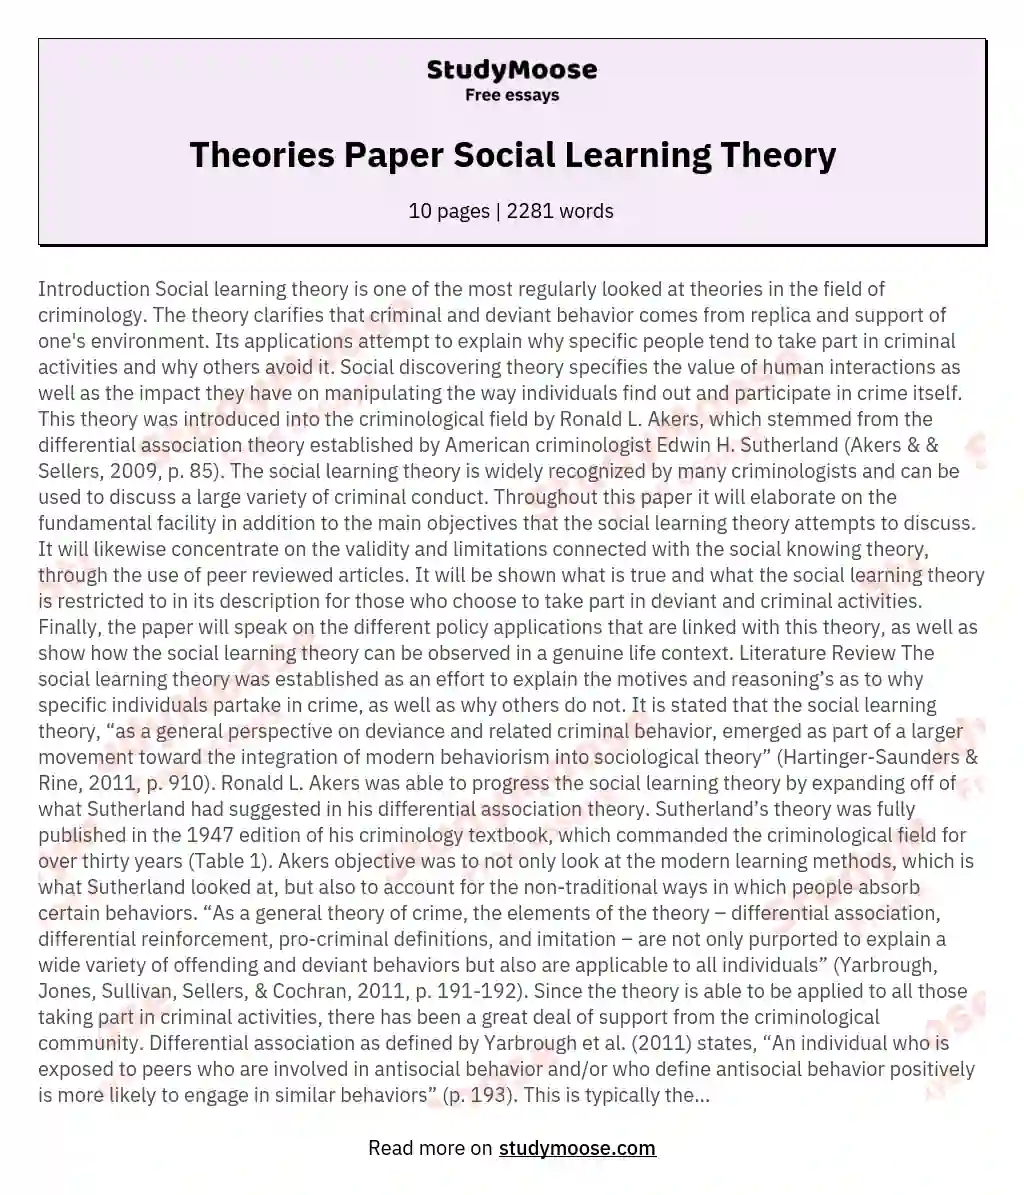 Theories Paper Social Learning Theory essay